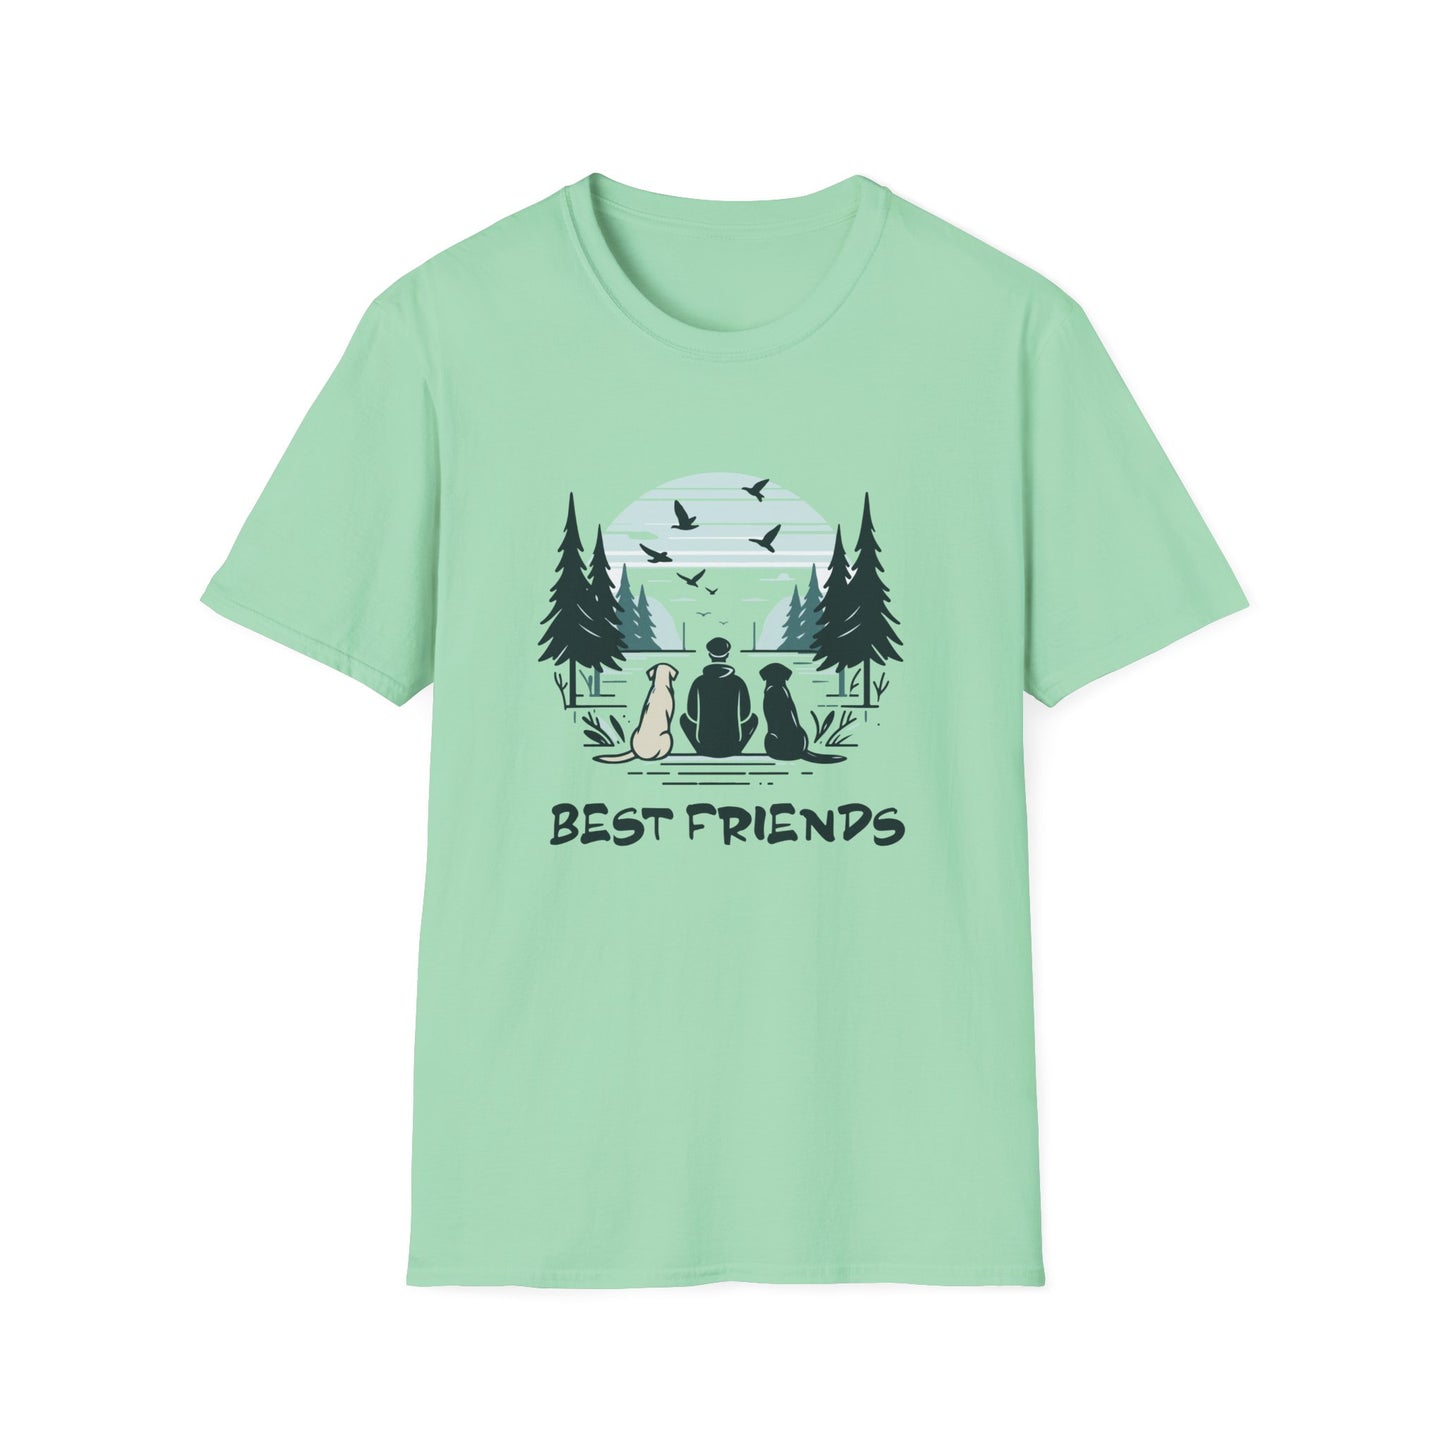 5 No Dogs Left Behind - Unisex Softstyle T-Shirt